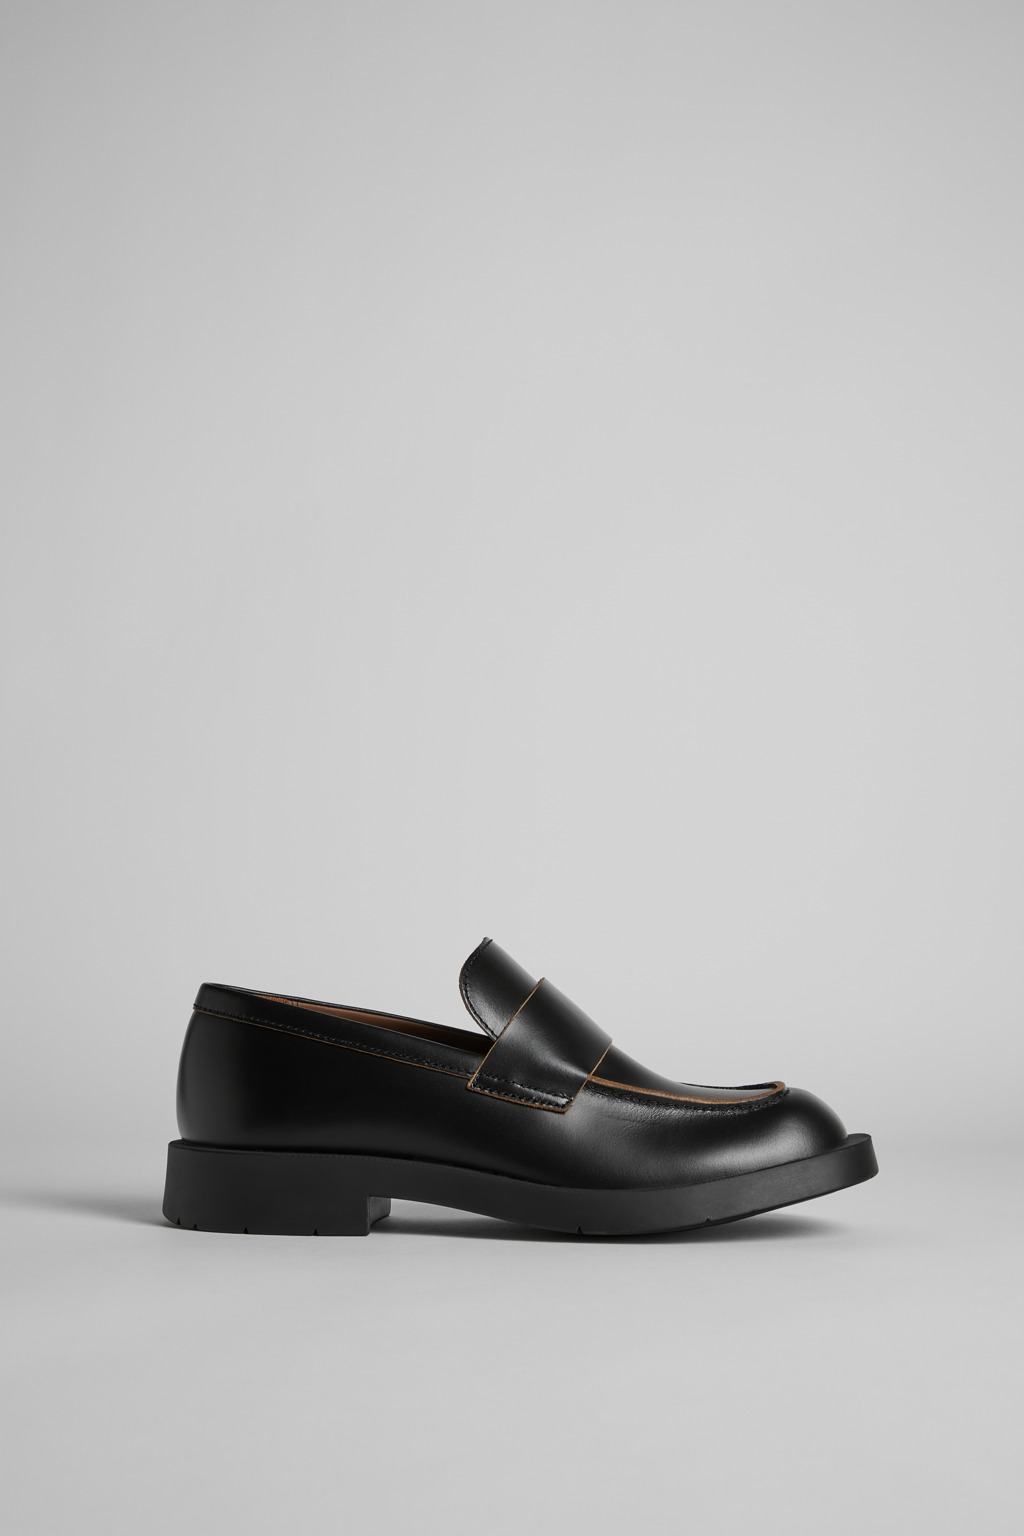 Walden Black Formal Shoes for Women - Fall/Winter collection - Camper USA